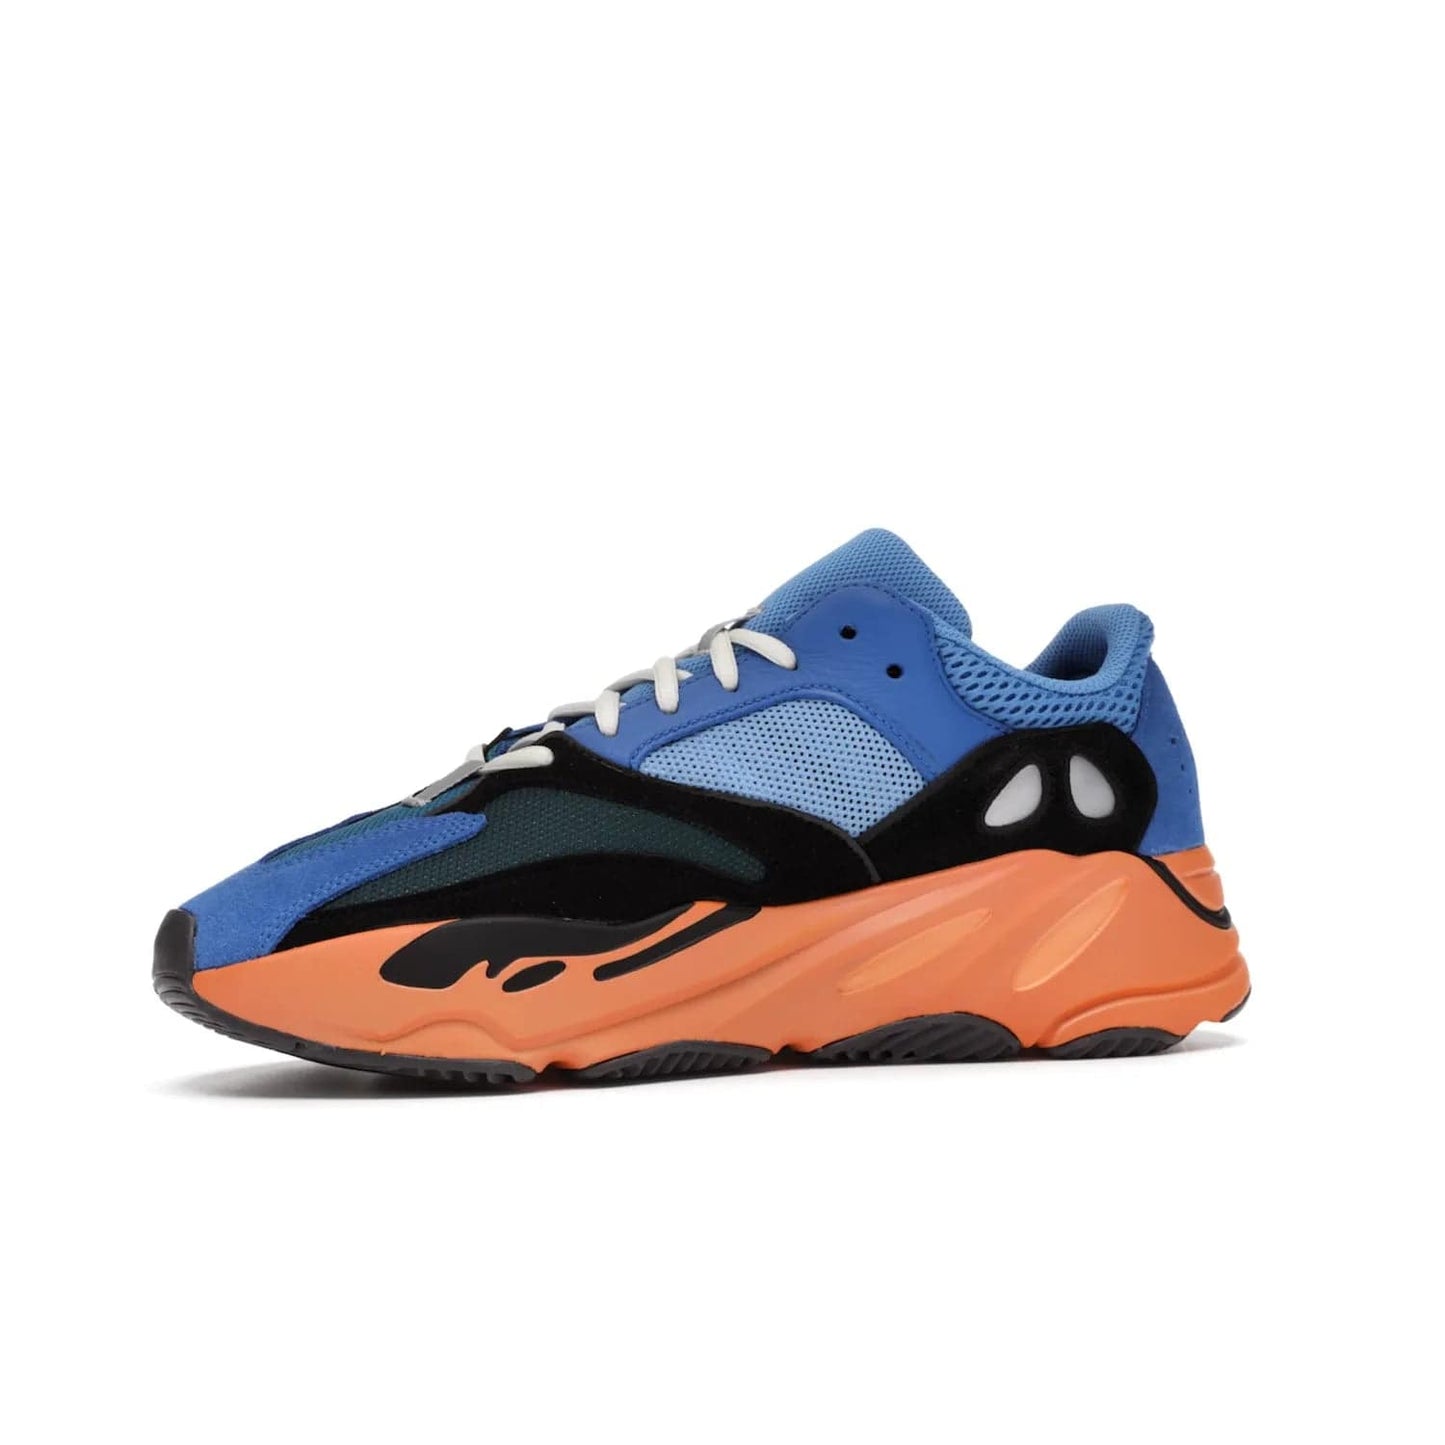 adidas Yeezy Boost 700 Bright Blue - Image 17 - Only at www.BallersClubKickz.com - Iconic sneaker style meets vibrant colour with the adidas Yeezy Boost 700 Bright Blue. Reflective accents, turquoise and teal panels, bright orange midsole and black outsole make for a bold release. April 2021.